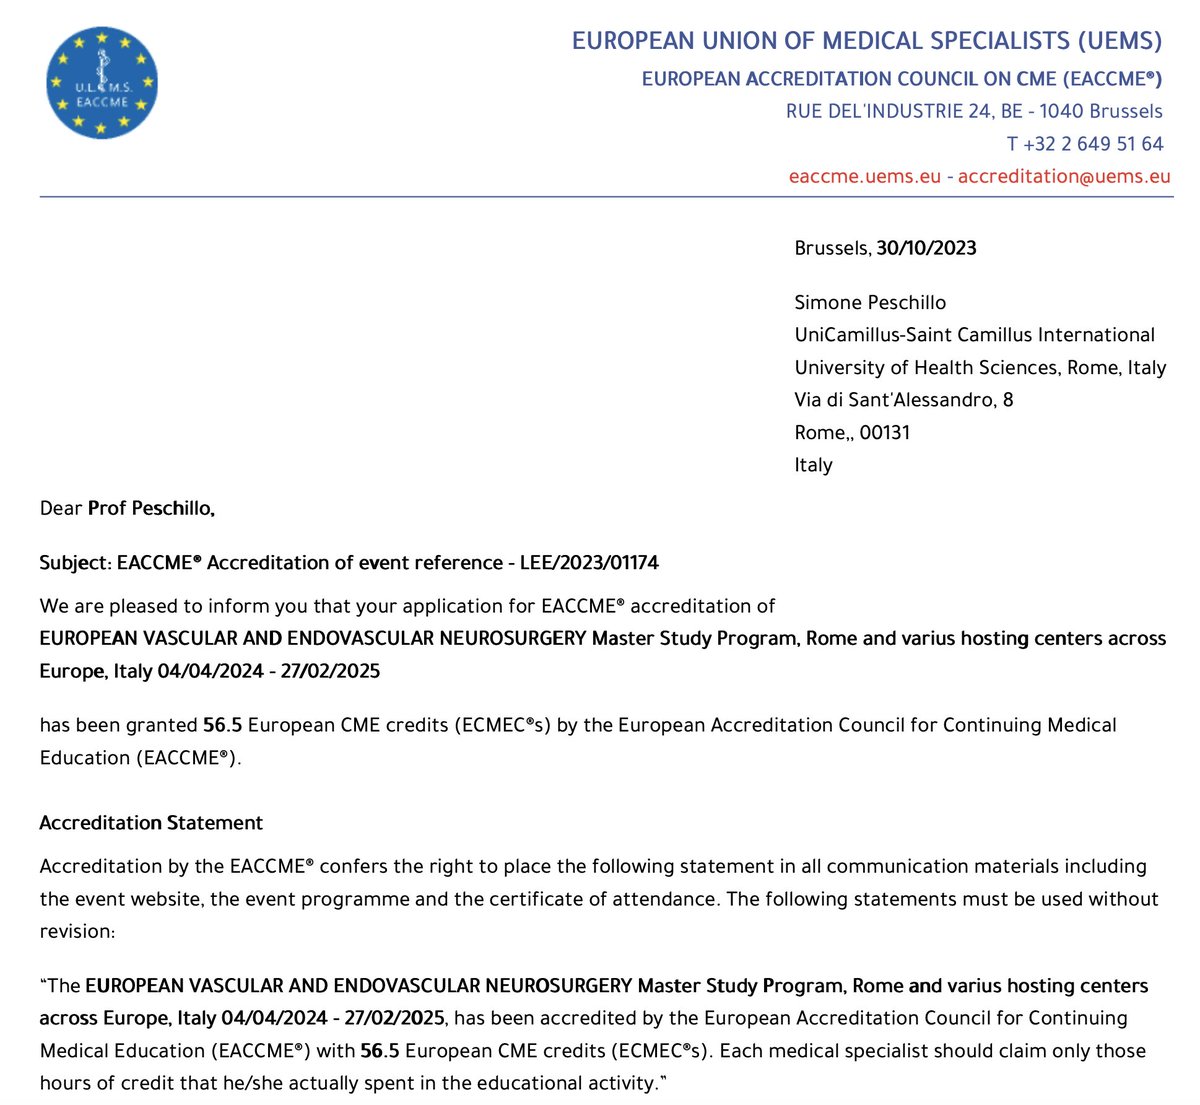 It is with immense pleasure that I inform you that the EUROPEAN VASCULAR AND ENDOVASCULAR NEUROSURGERY Master Study Program has been accredited by the European Accreditation Council for Continuing Medical Education (EACCME®) unicamillus.org/master-and-cou…